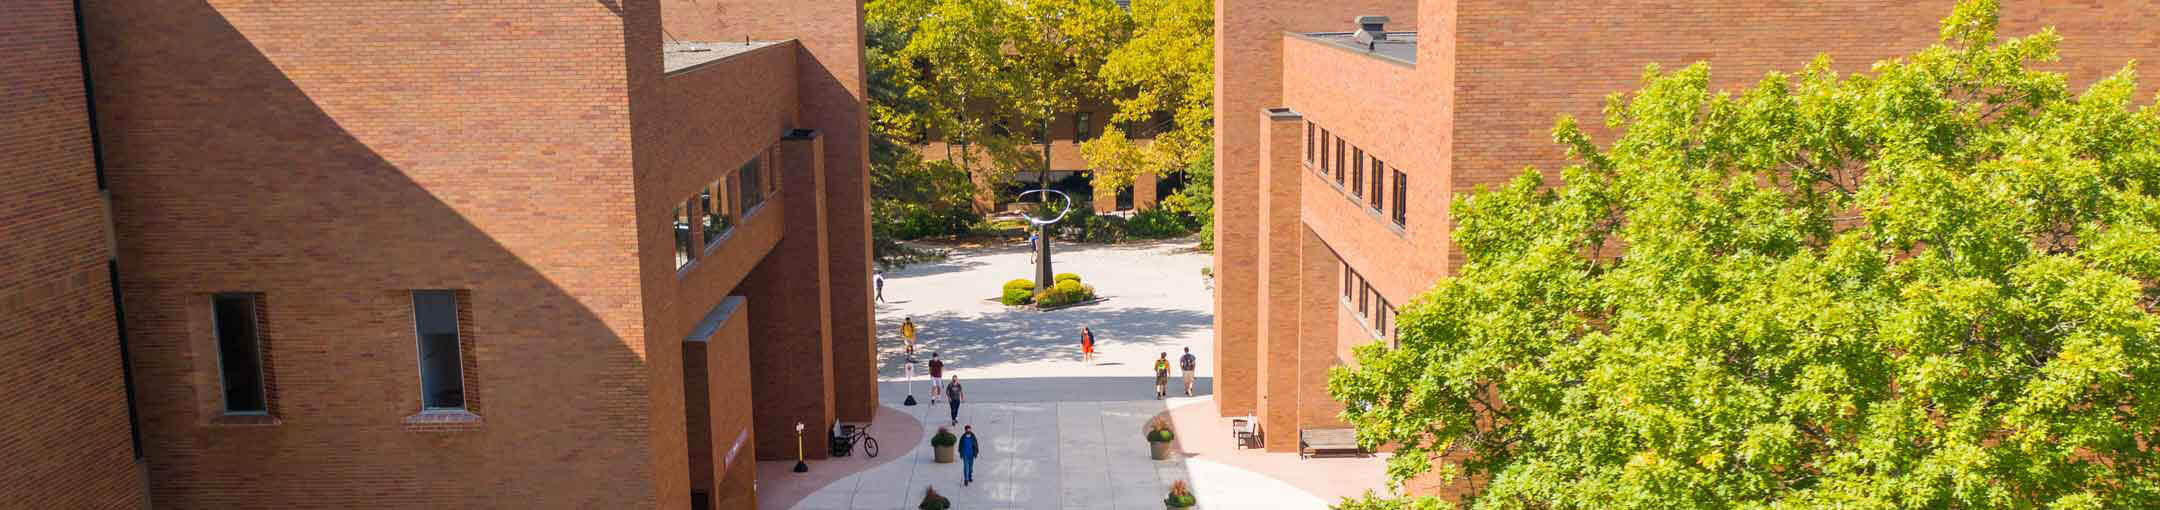 Aerial view of the R I T campus, showing students walking between the Library and Liberal Arts Hall.